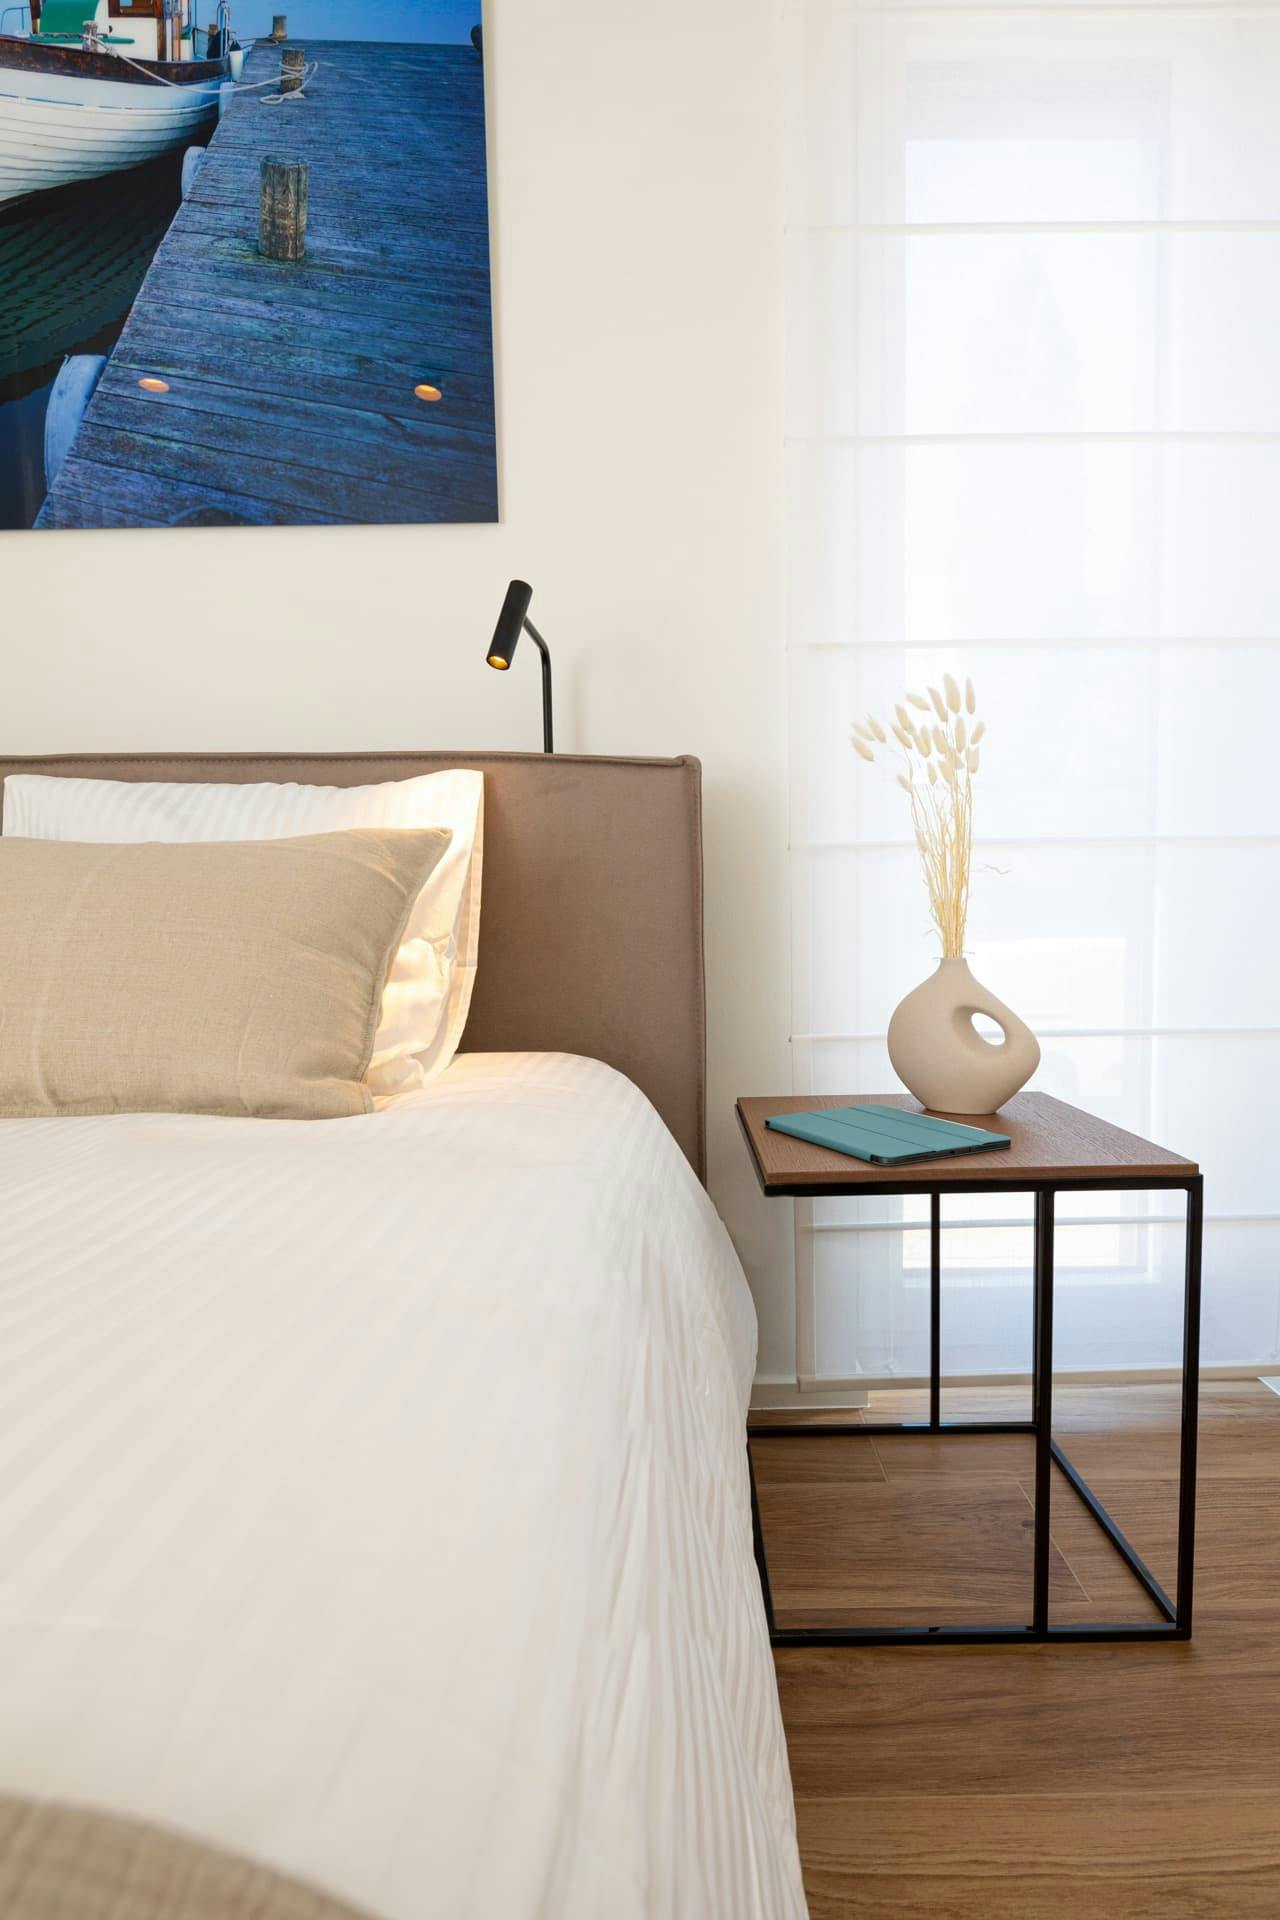 image shows a small part of a bed with a bedside table and a large full length window. on the table there is an ipad with a blue cover and a vase with a handle holding dried grasses